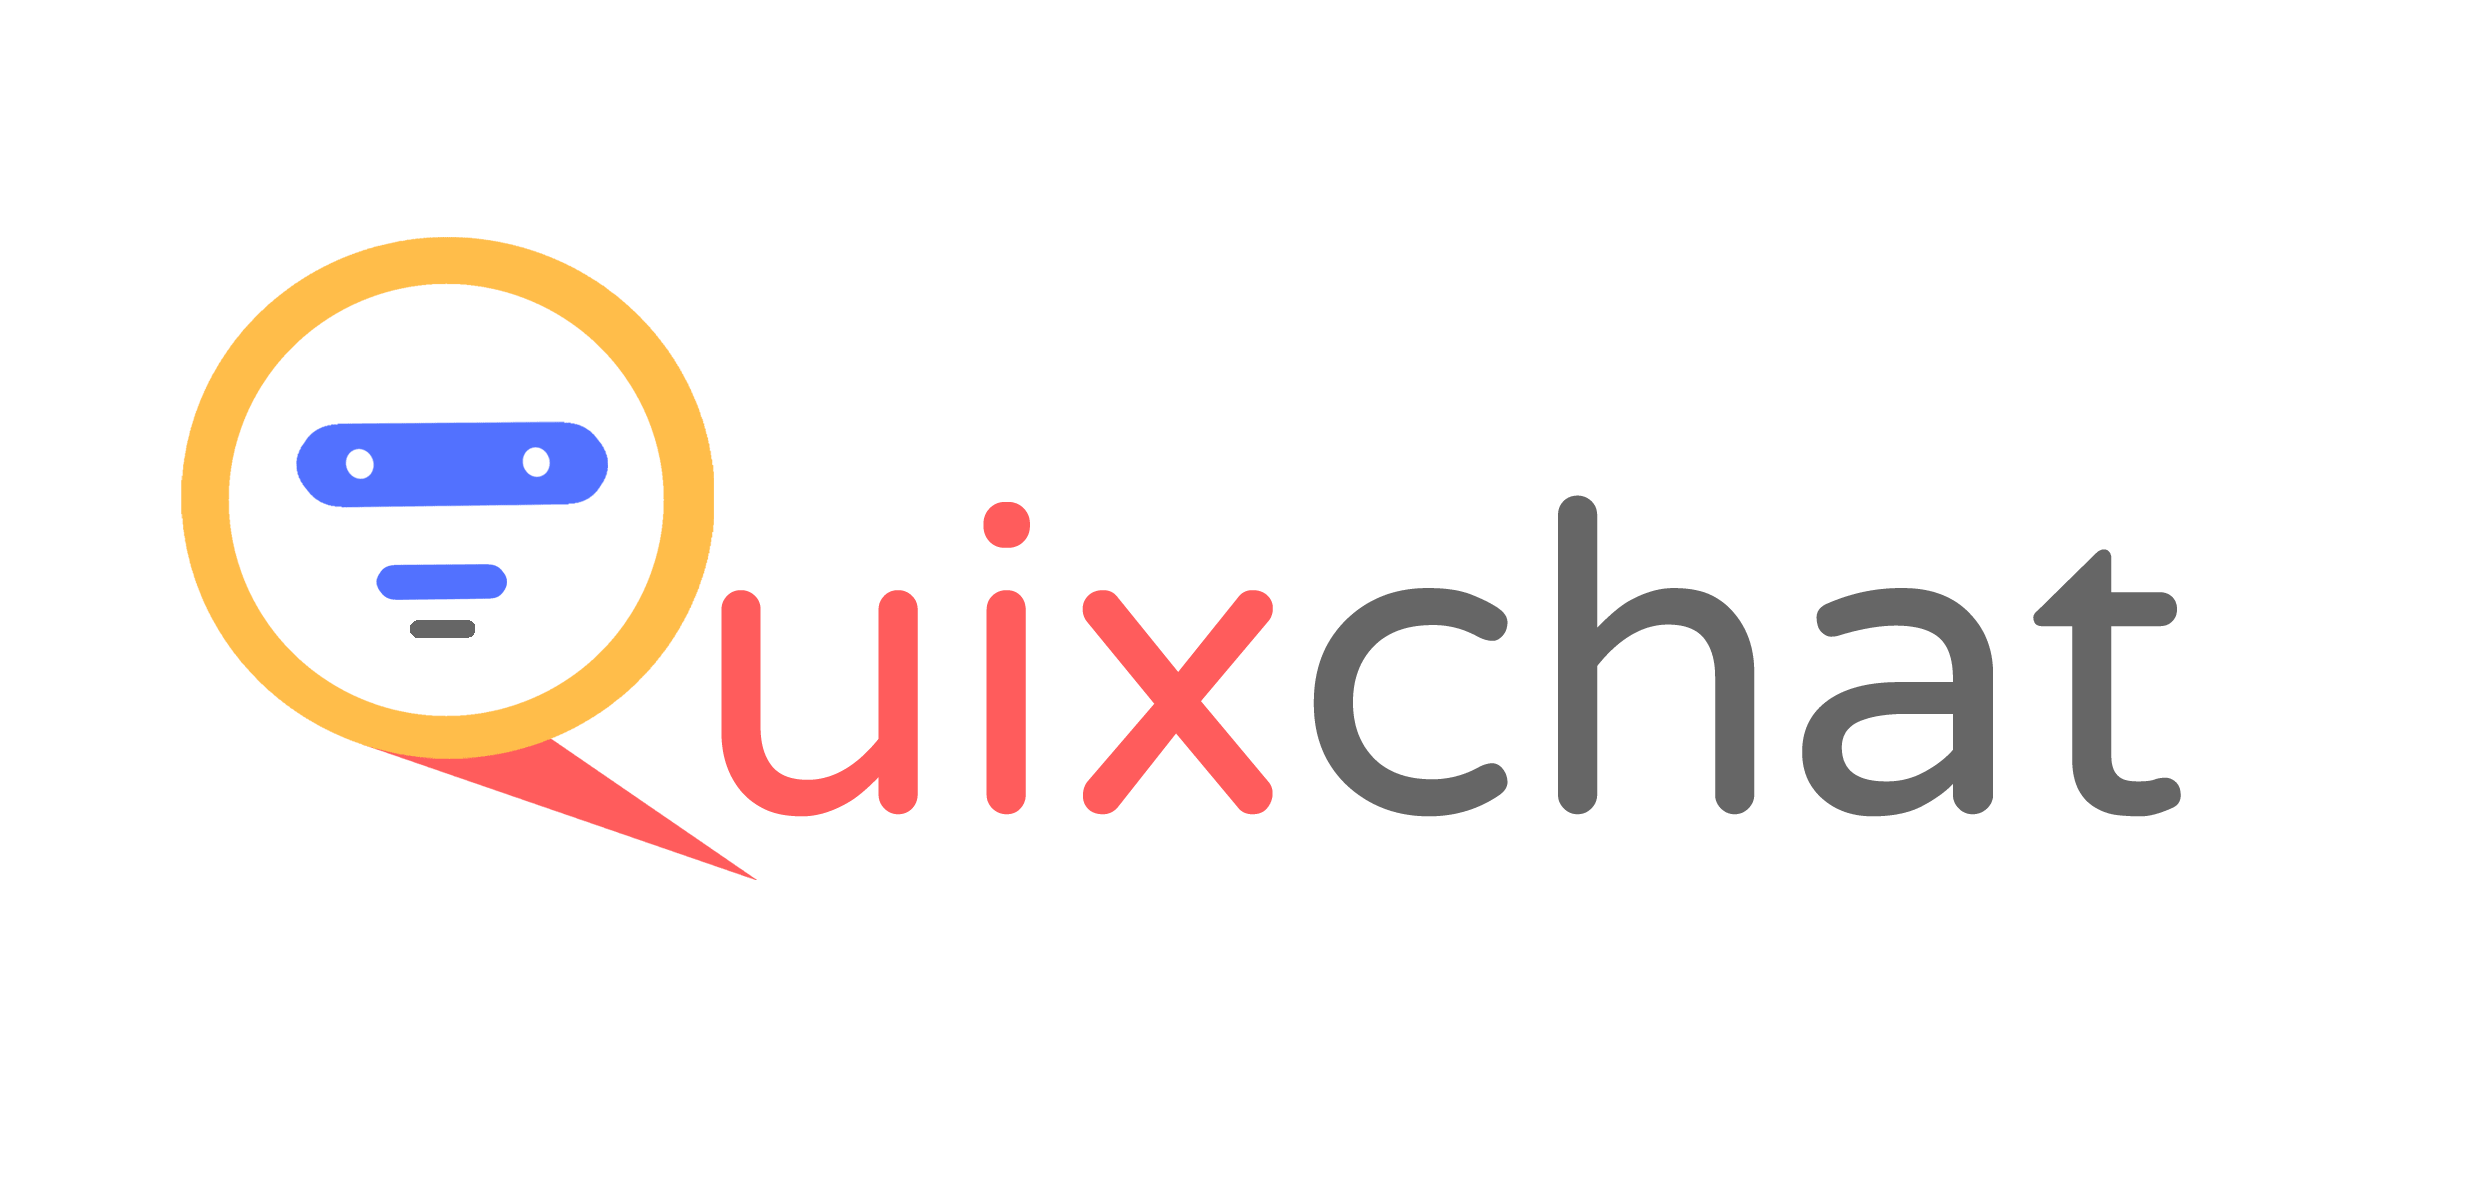 QuixChat - Add Automated Bot Chat support & Customer Support to your website with popular messengers